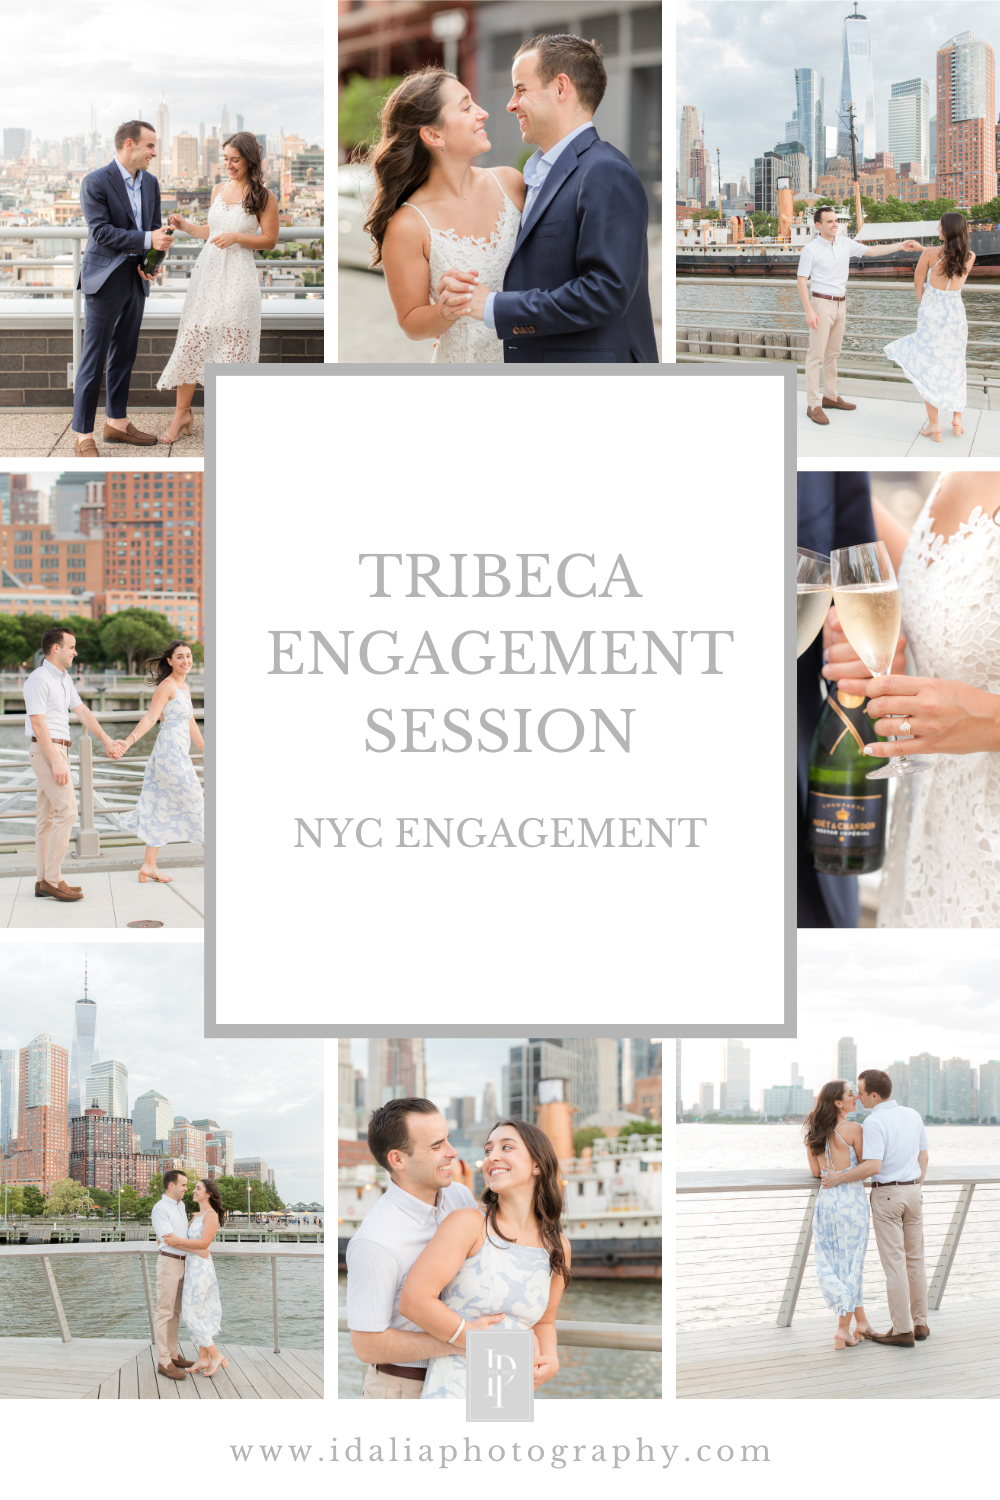 Tribeca Engagement Photos in NYC